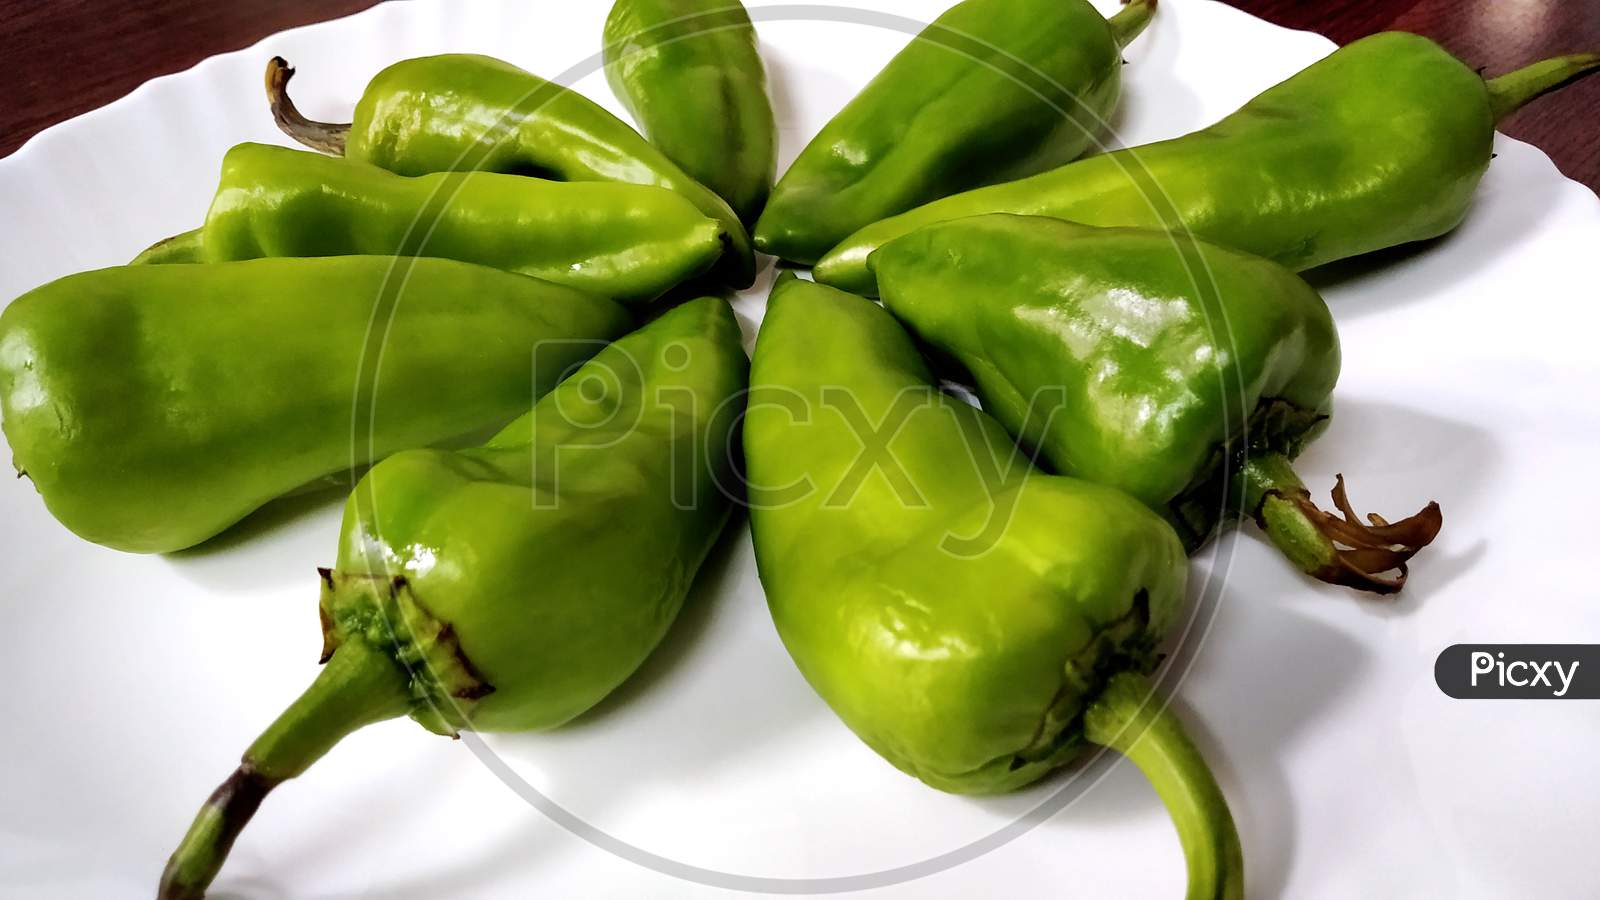 Big And Fresh Green Chilies Arranged On A White Plate